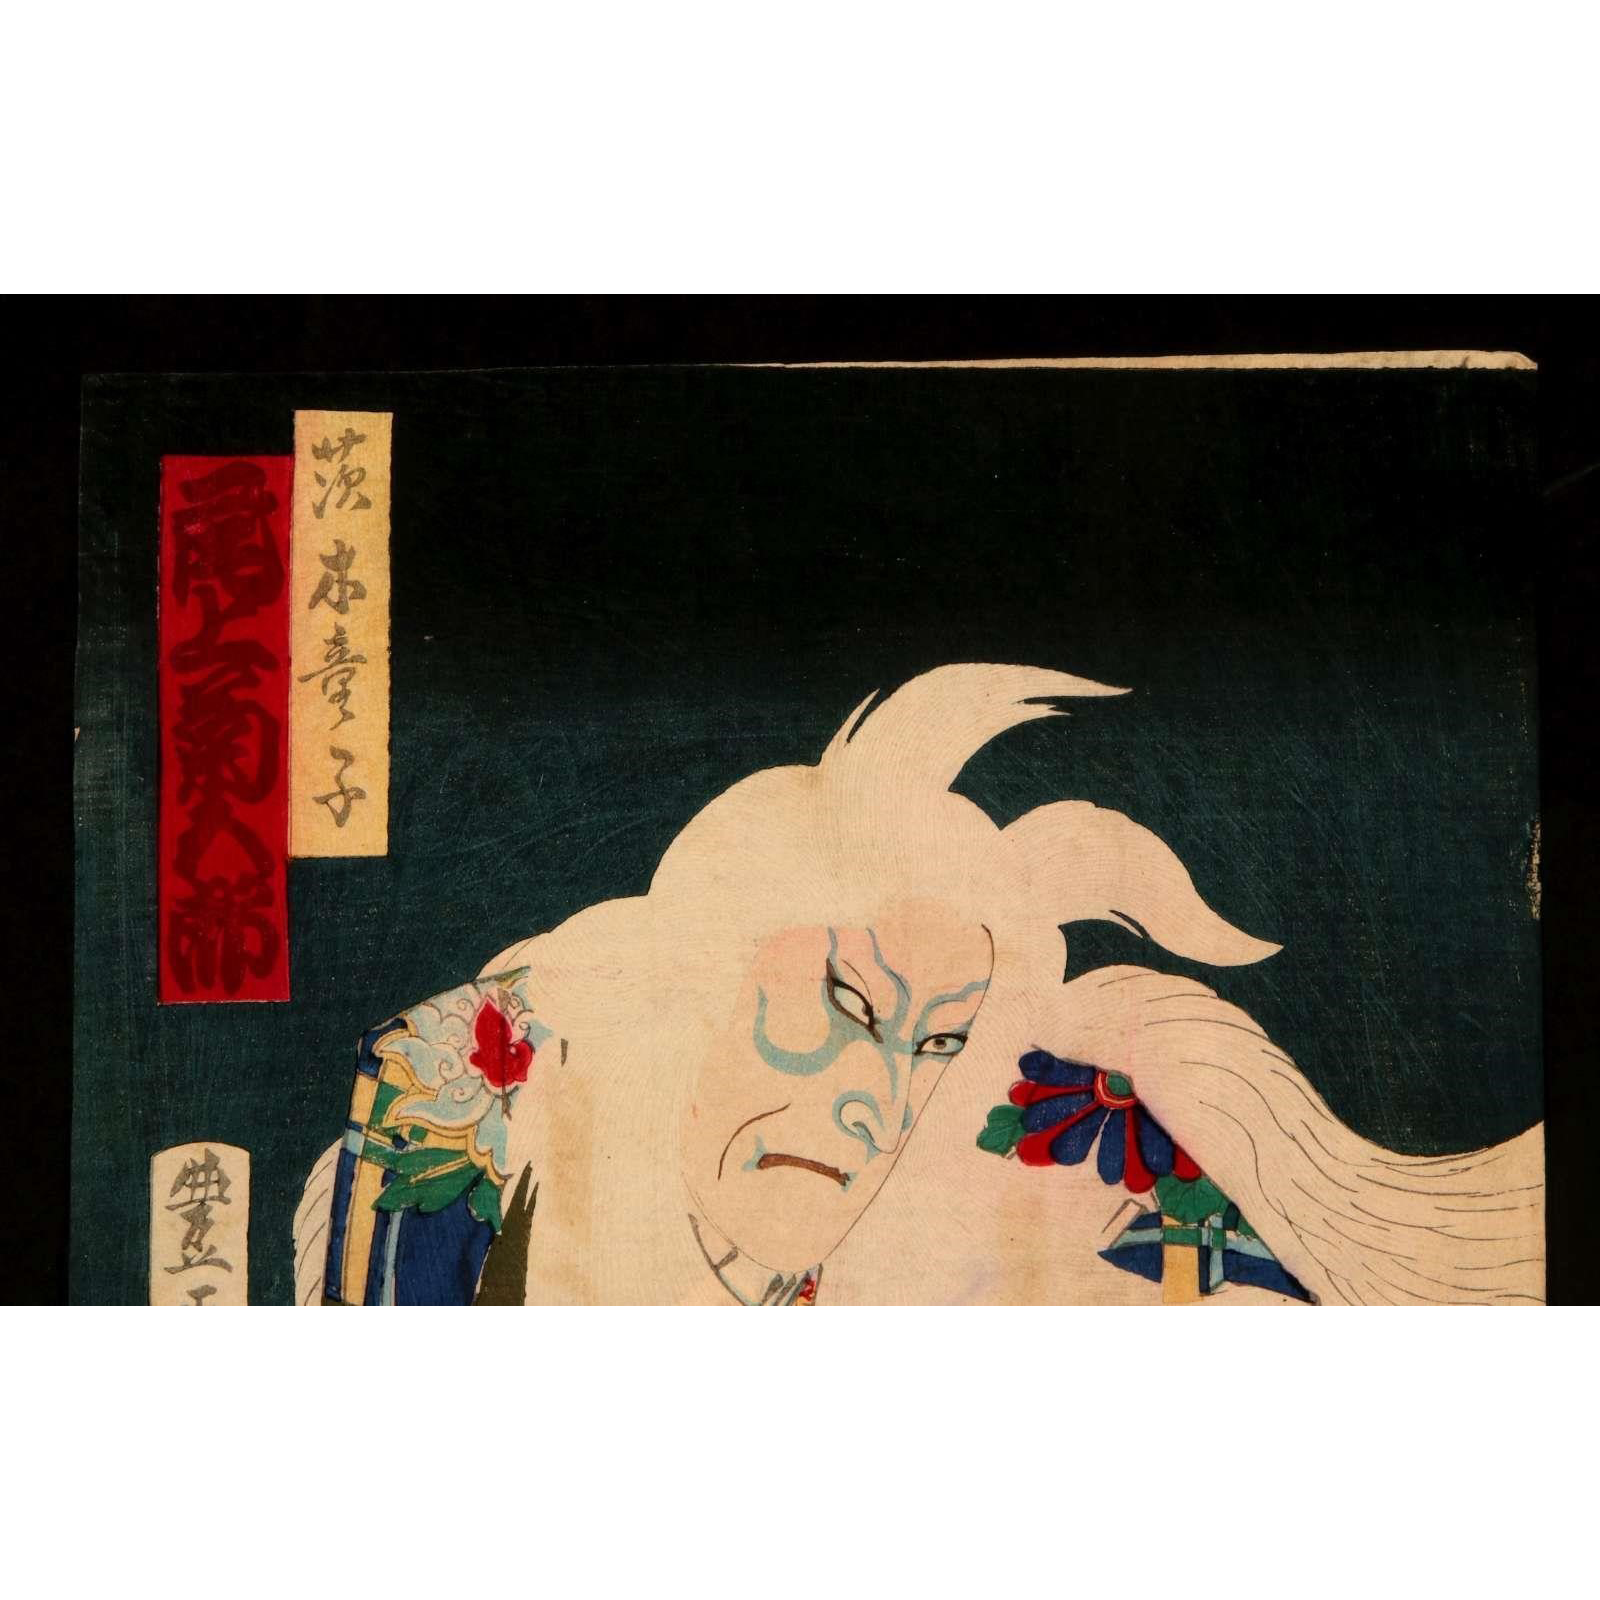 AW10-005: 19TH CENTURY JAPANESE TRIPTYCH WOODBLOCK PRINT